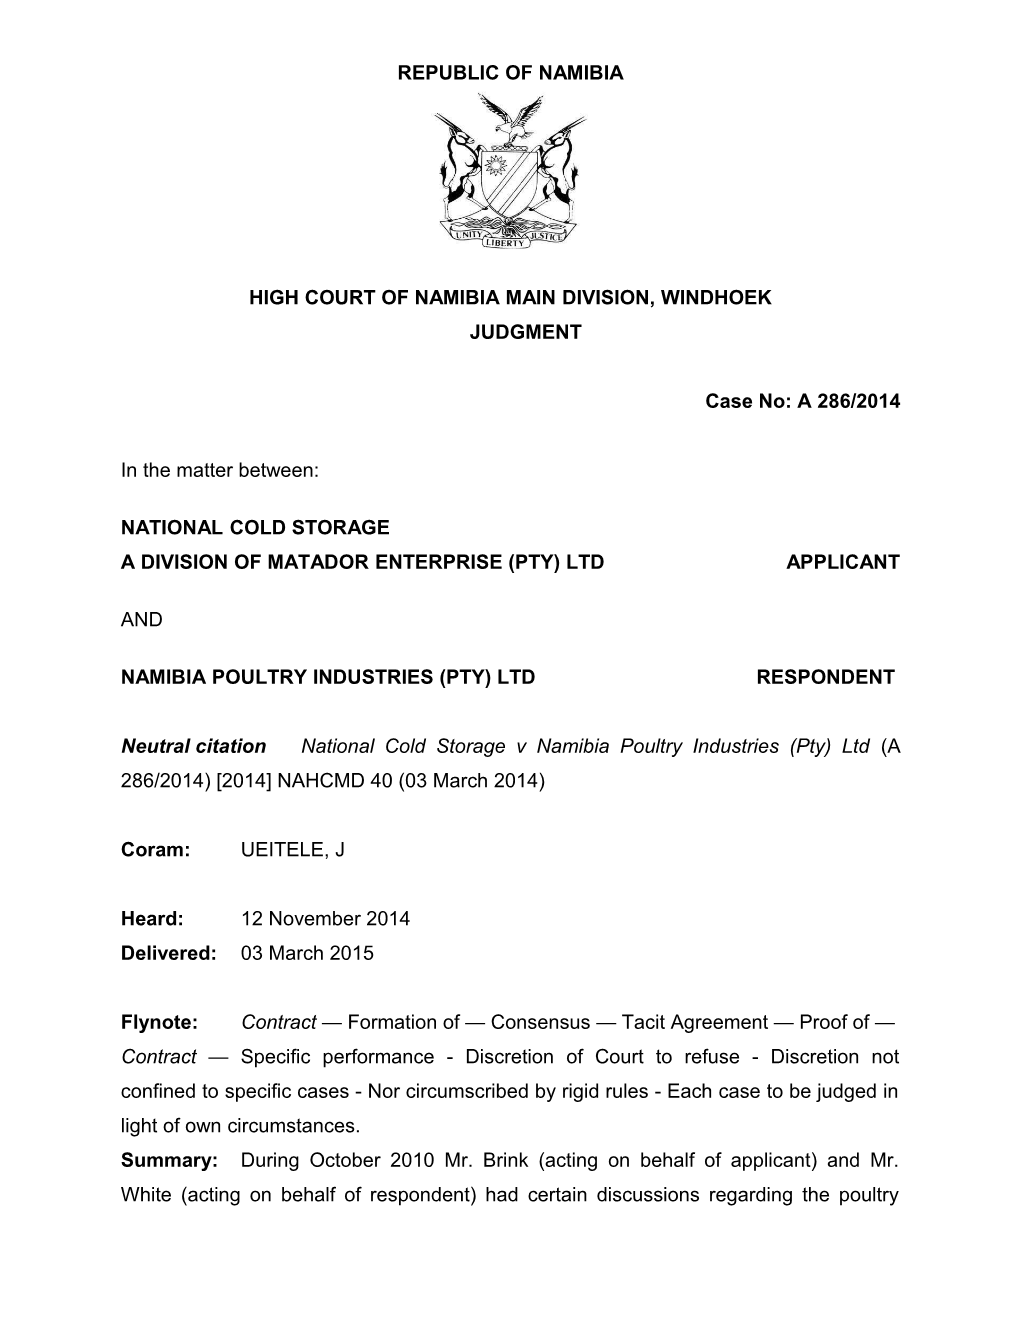 National Cold Storage V Namibia Poultry Industries (Pty) Ltd (A 286-2014) 2014 NAHCMD 40